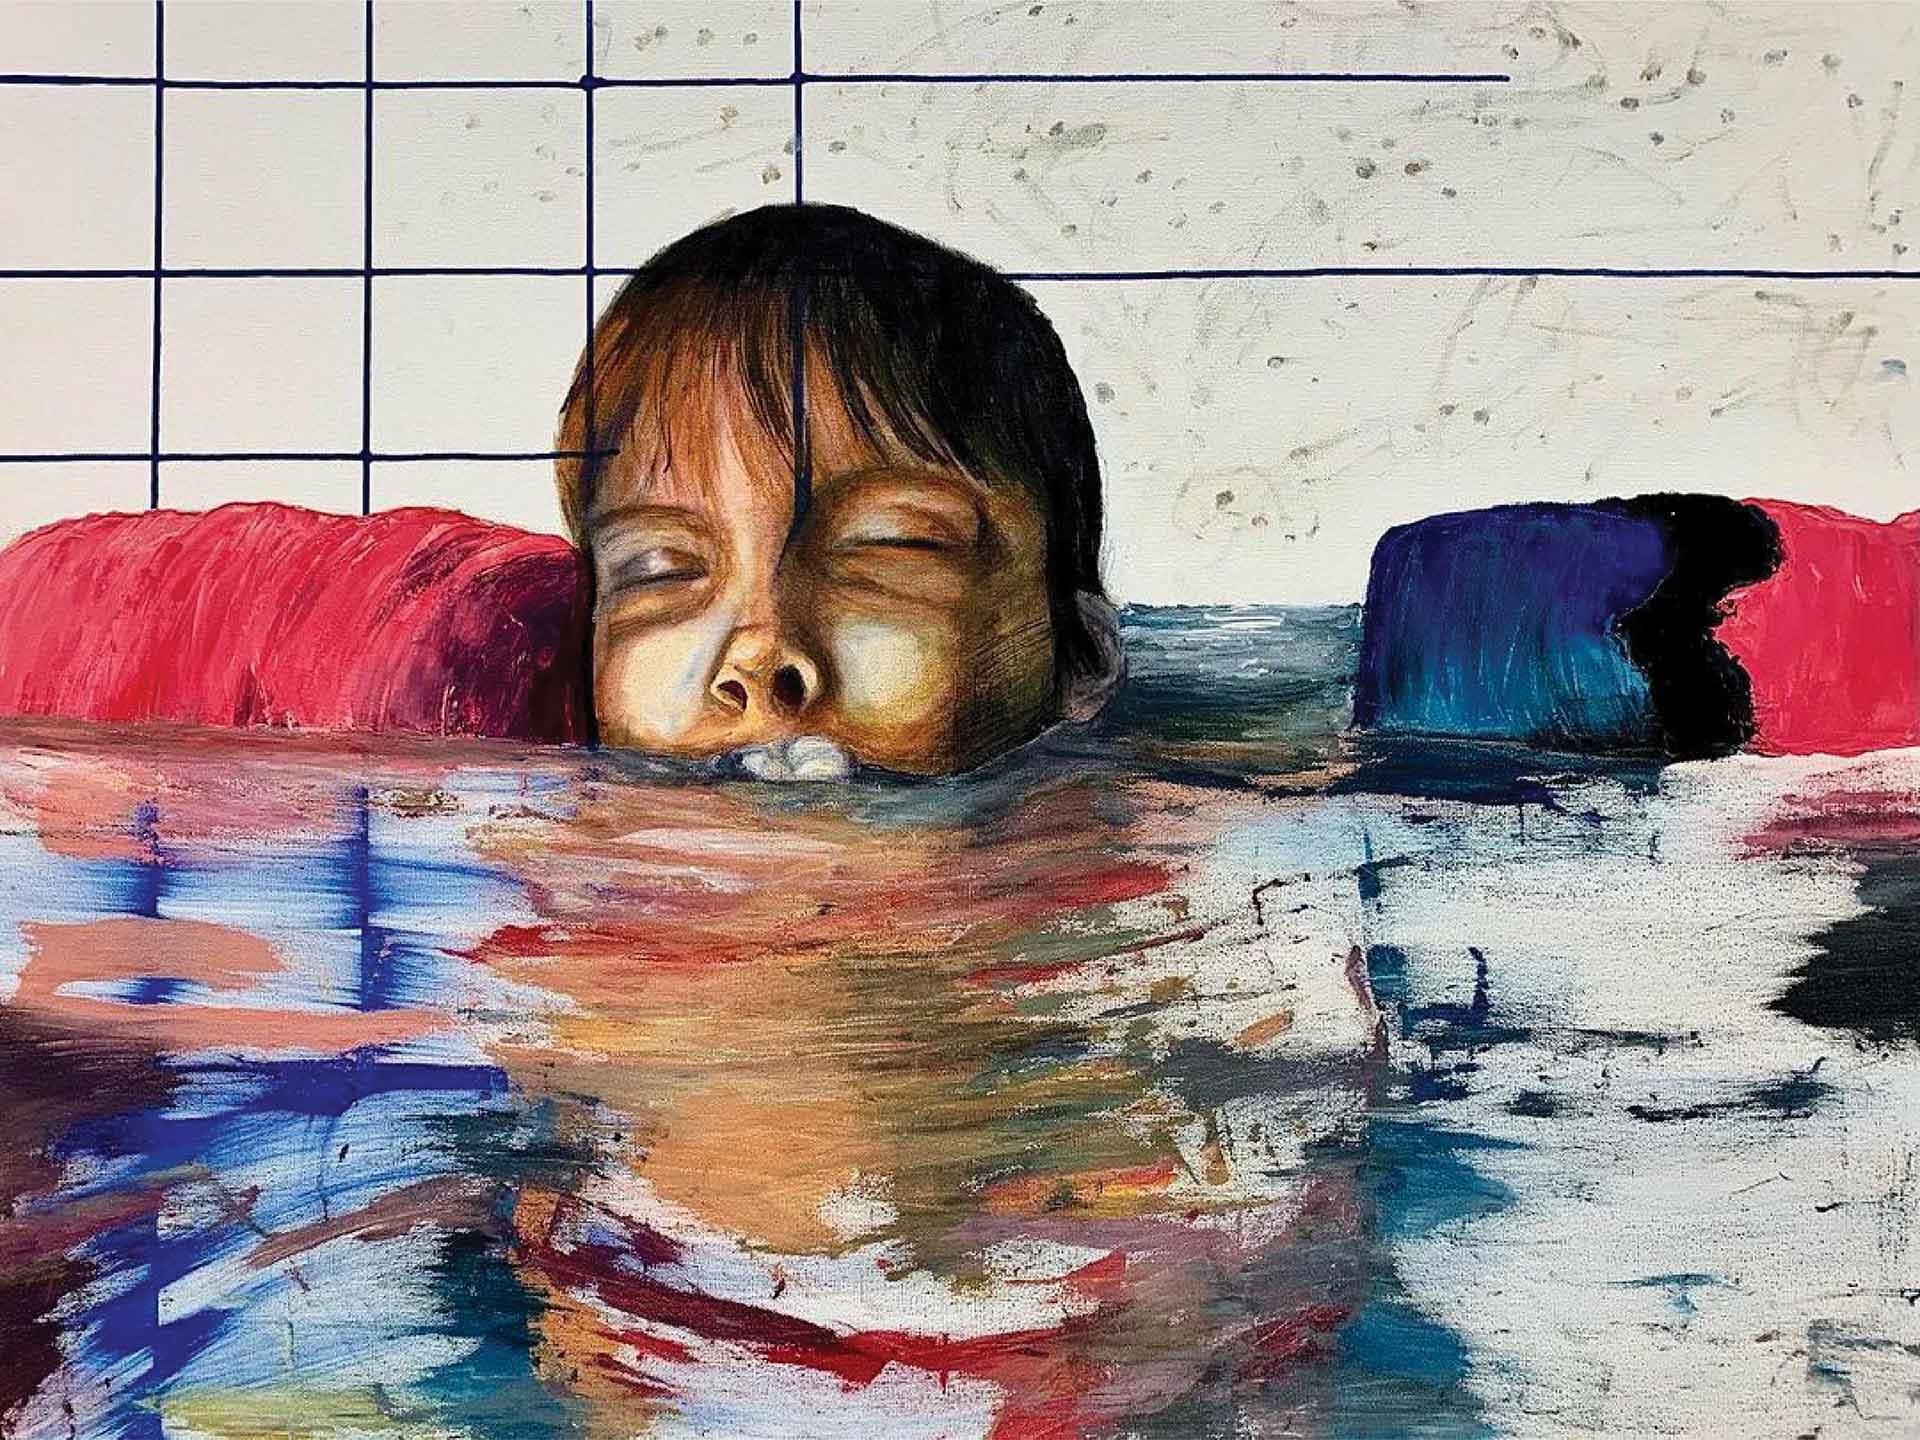 A painting of a person with brunette hair seeming to float with their eyes closed next to the floating line in the pool that separates the shallow end from the deep end in bright colors